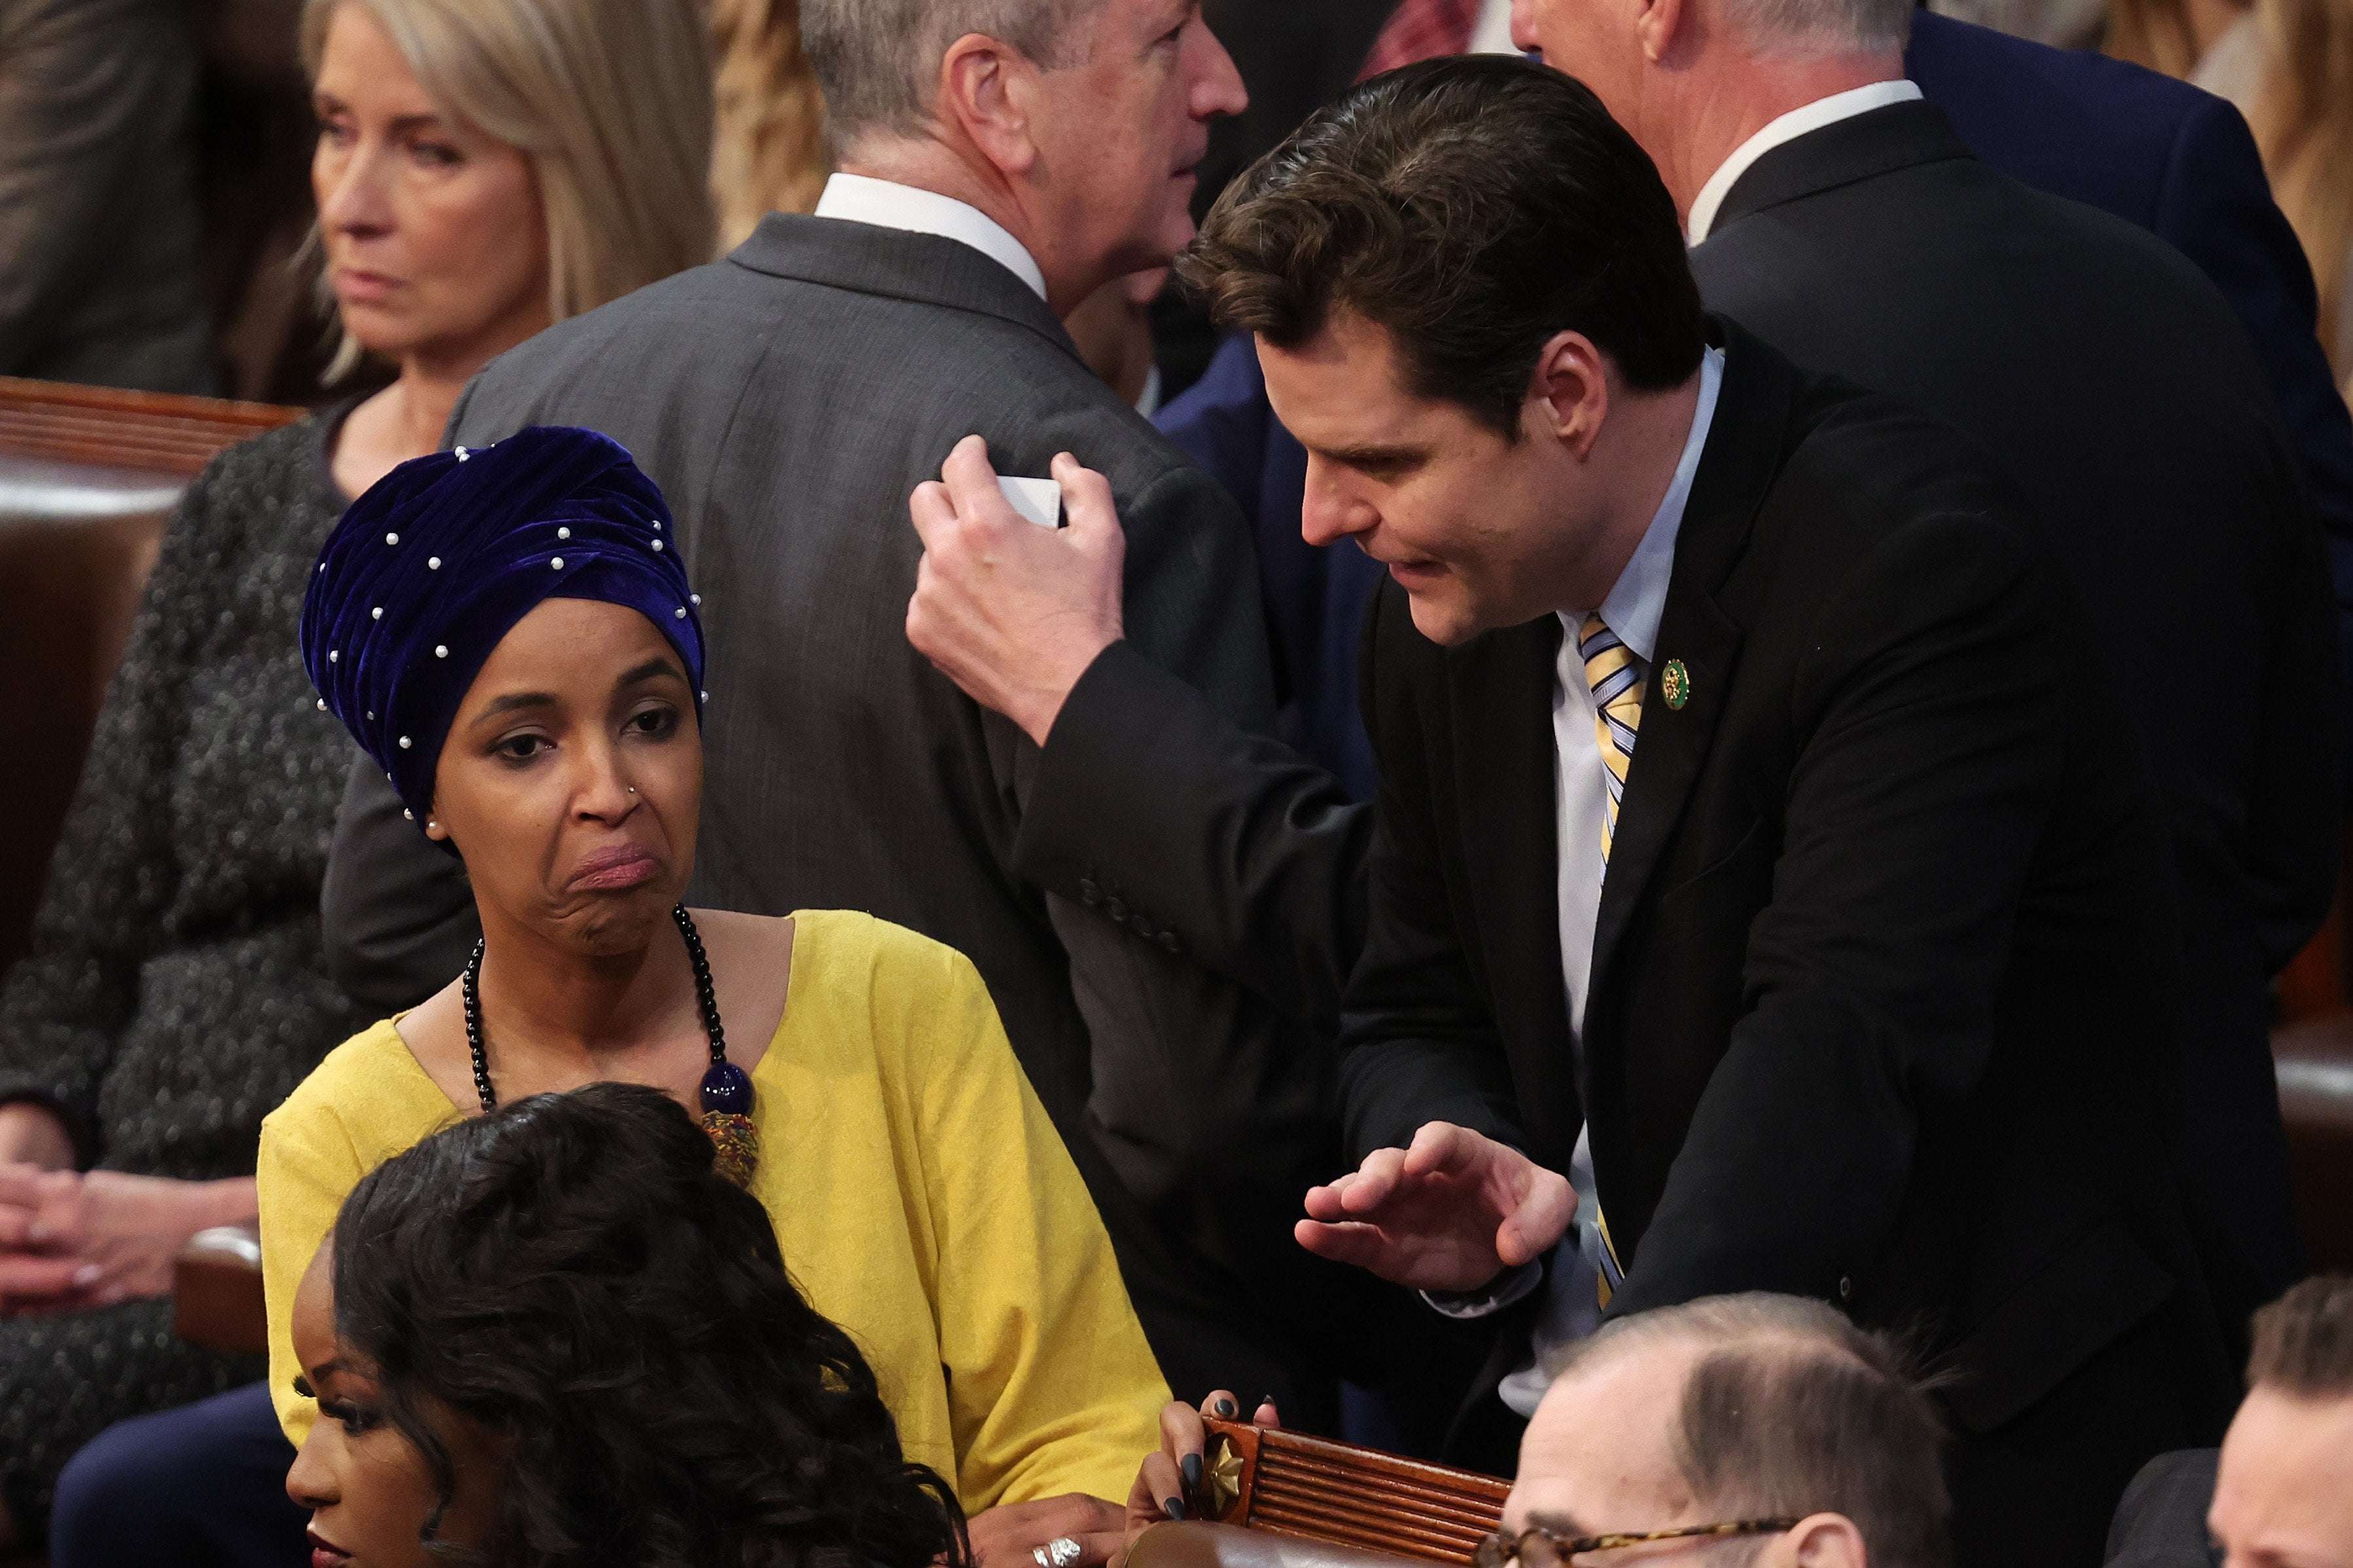 image for Ilhan Omar's Reaction When Approached by Matt Gaetz Goes Viral